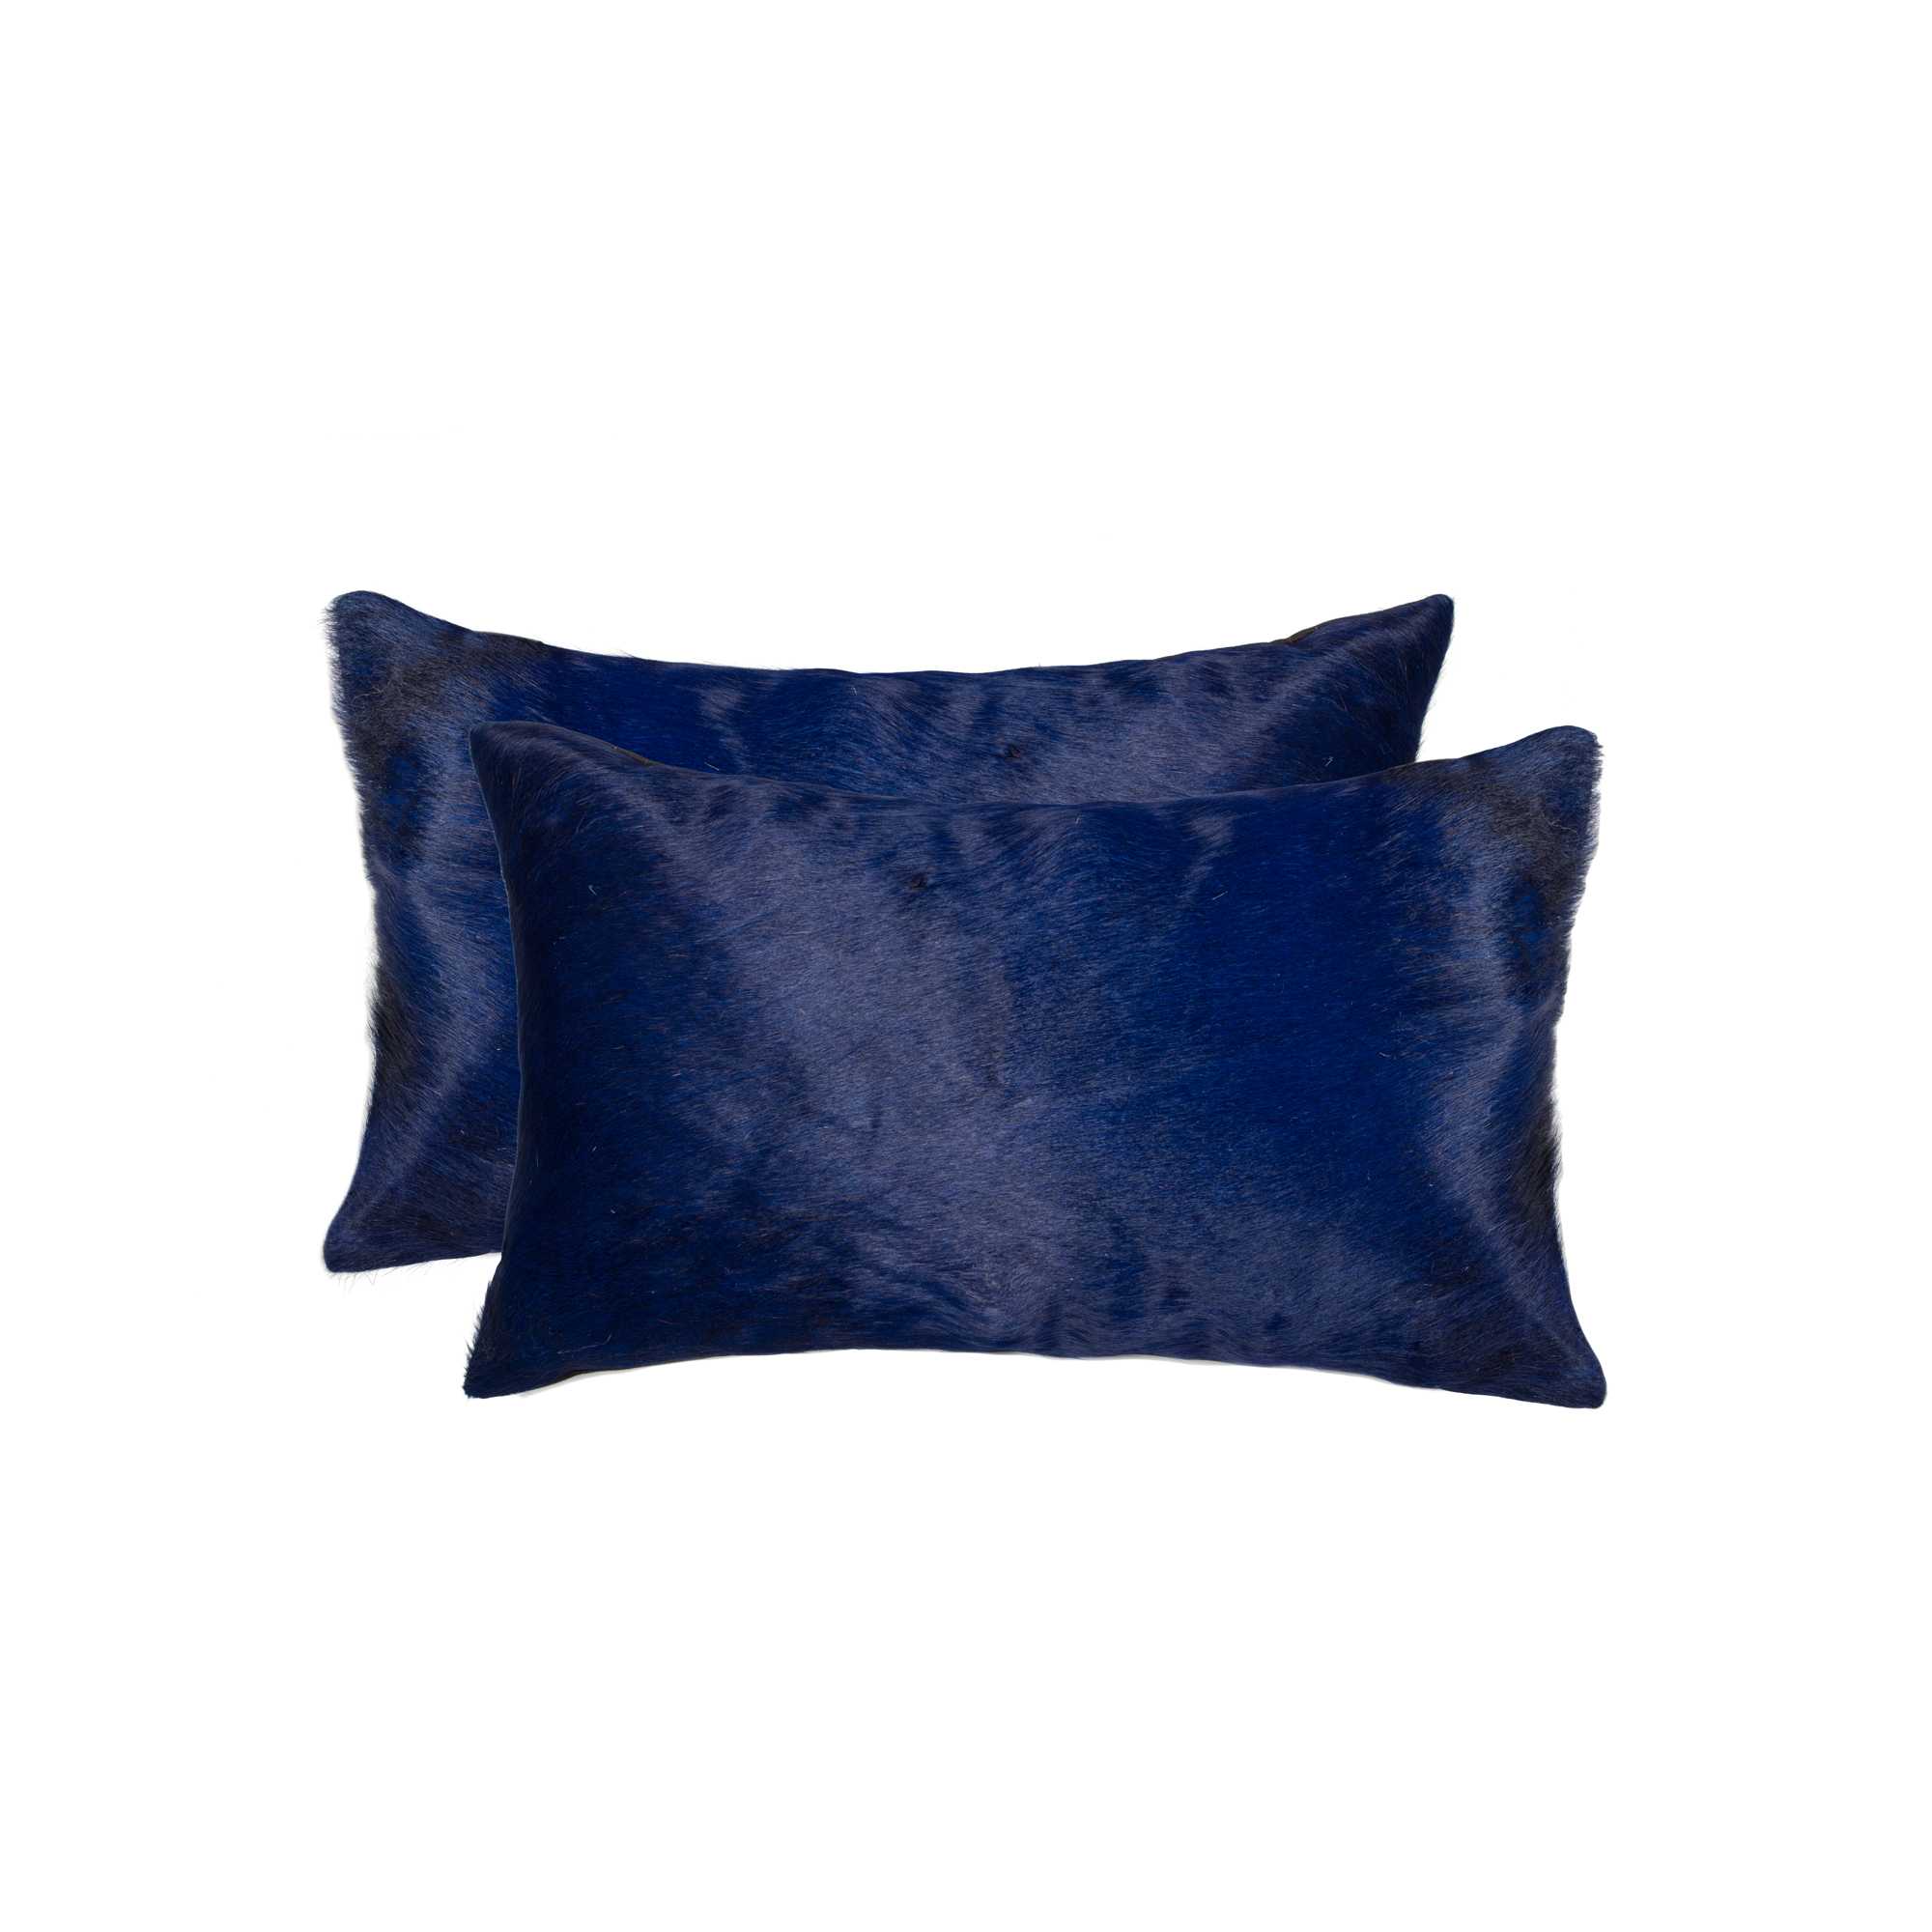 12" x 20" x 5" Navy, Cowhide - Pillow 2-Pack